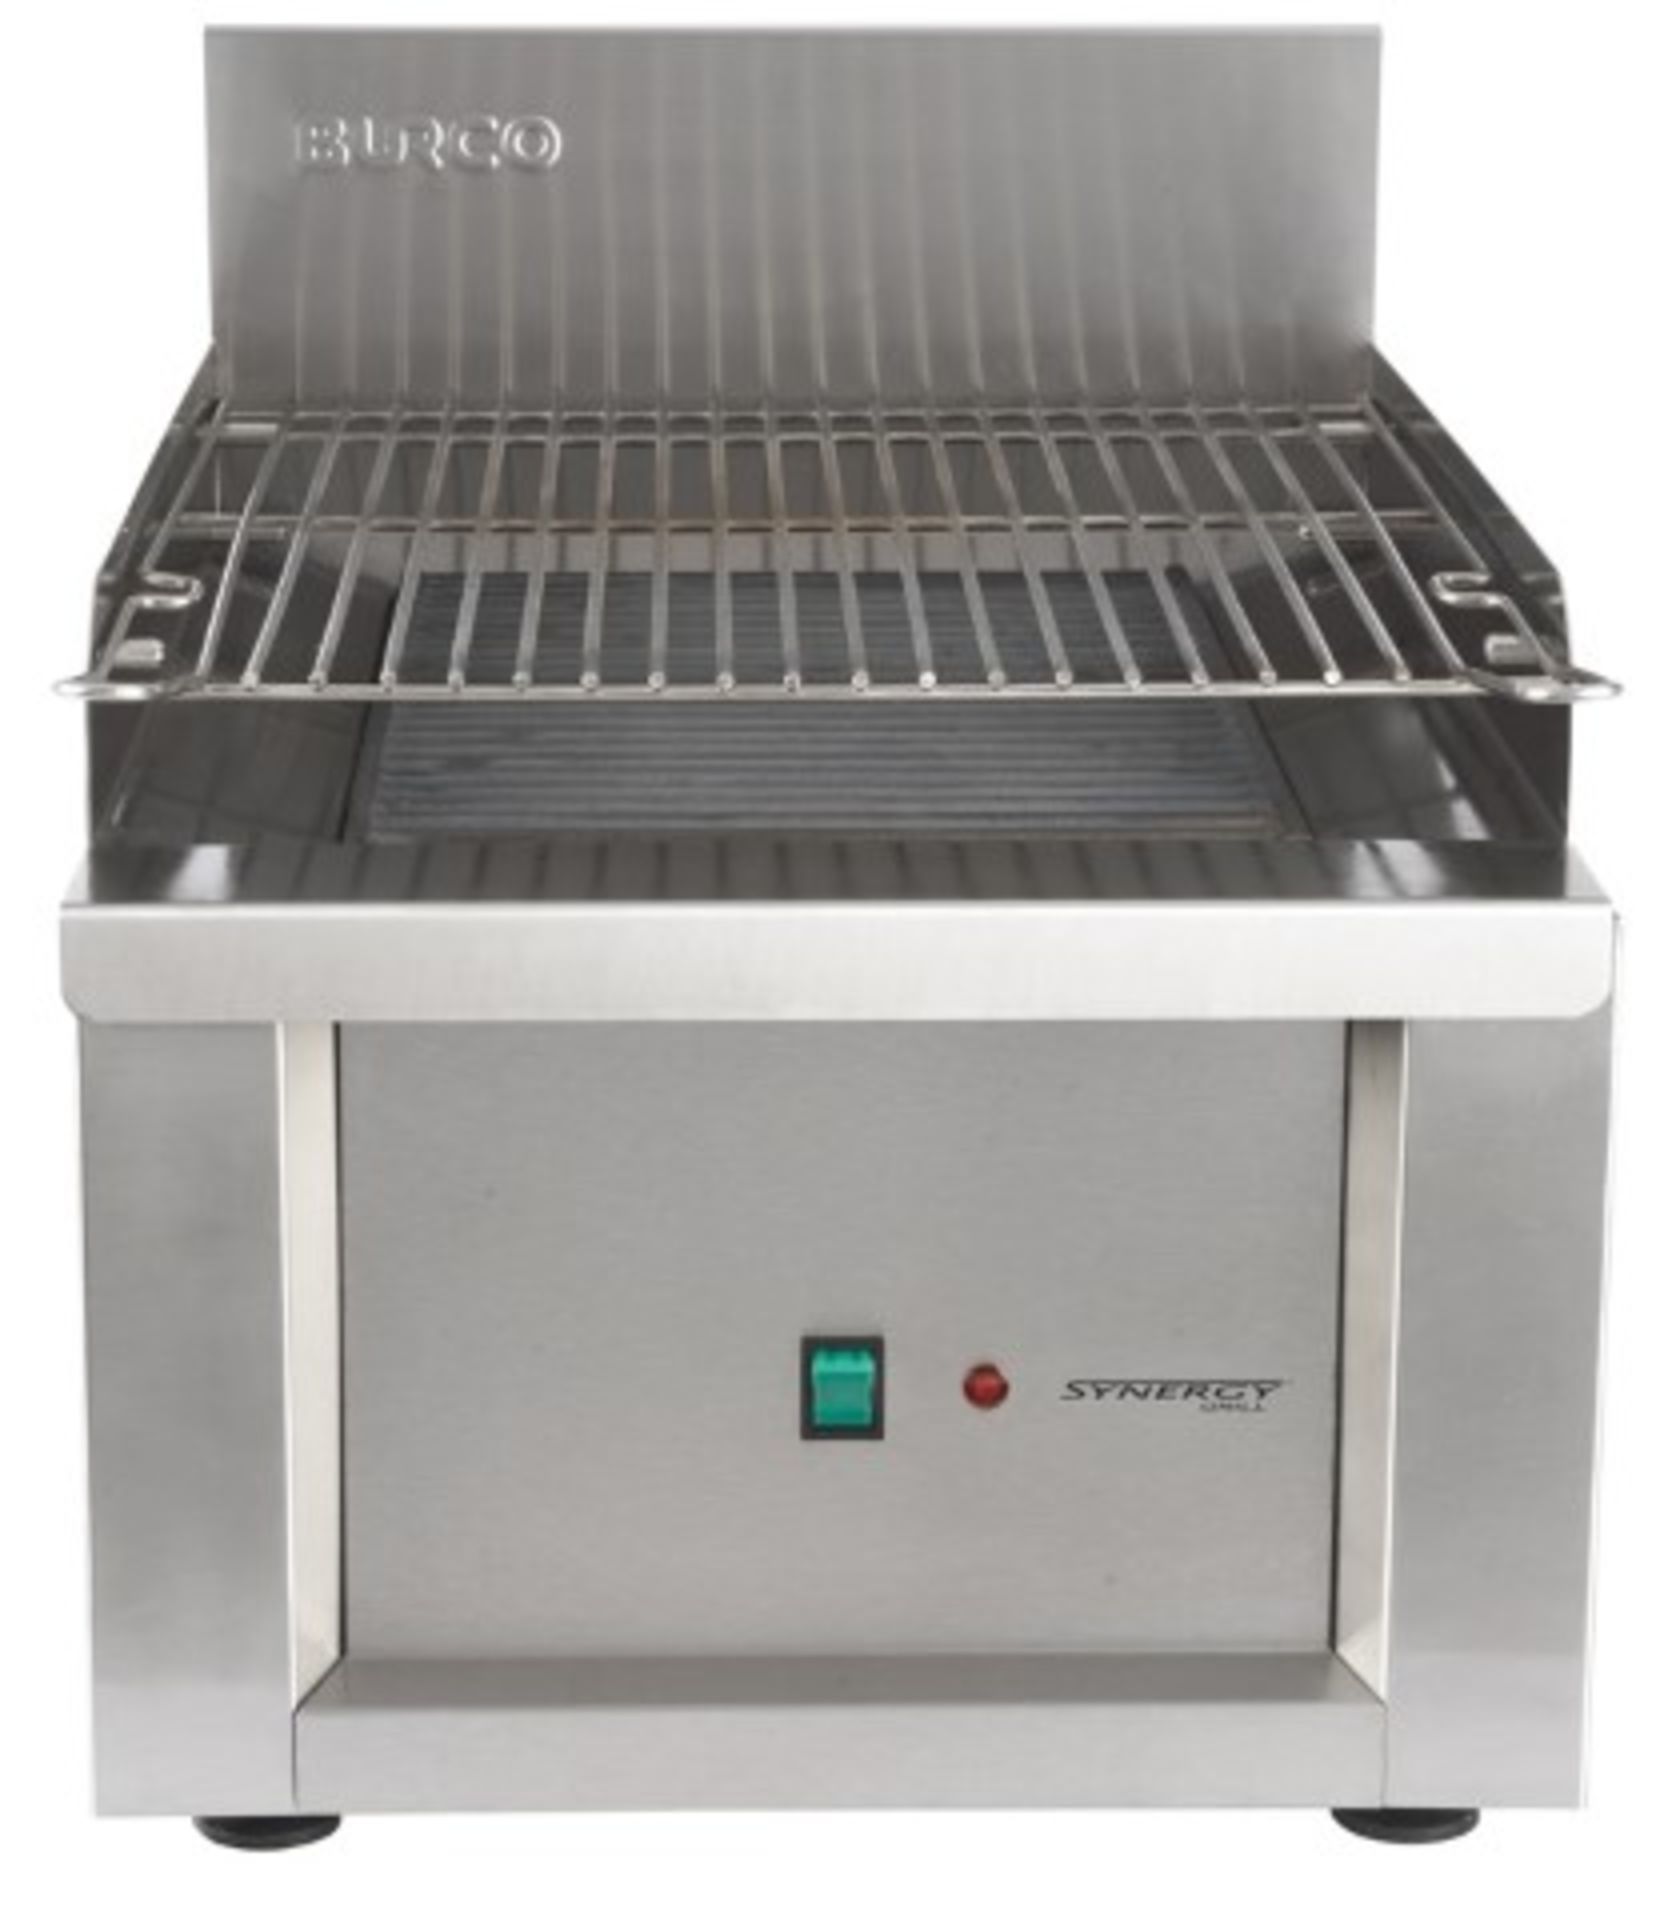 10 x Burco SYNG01 Fat Atomising Synergy Char Grills - Stainless Steel – New & Boxed – CL053 – - Image 2 of 3